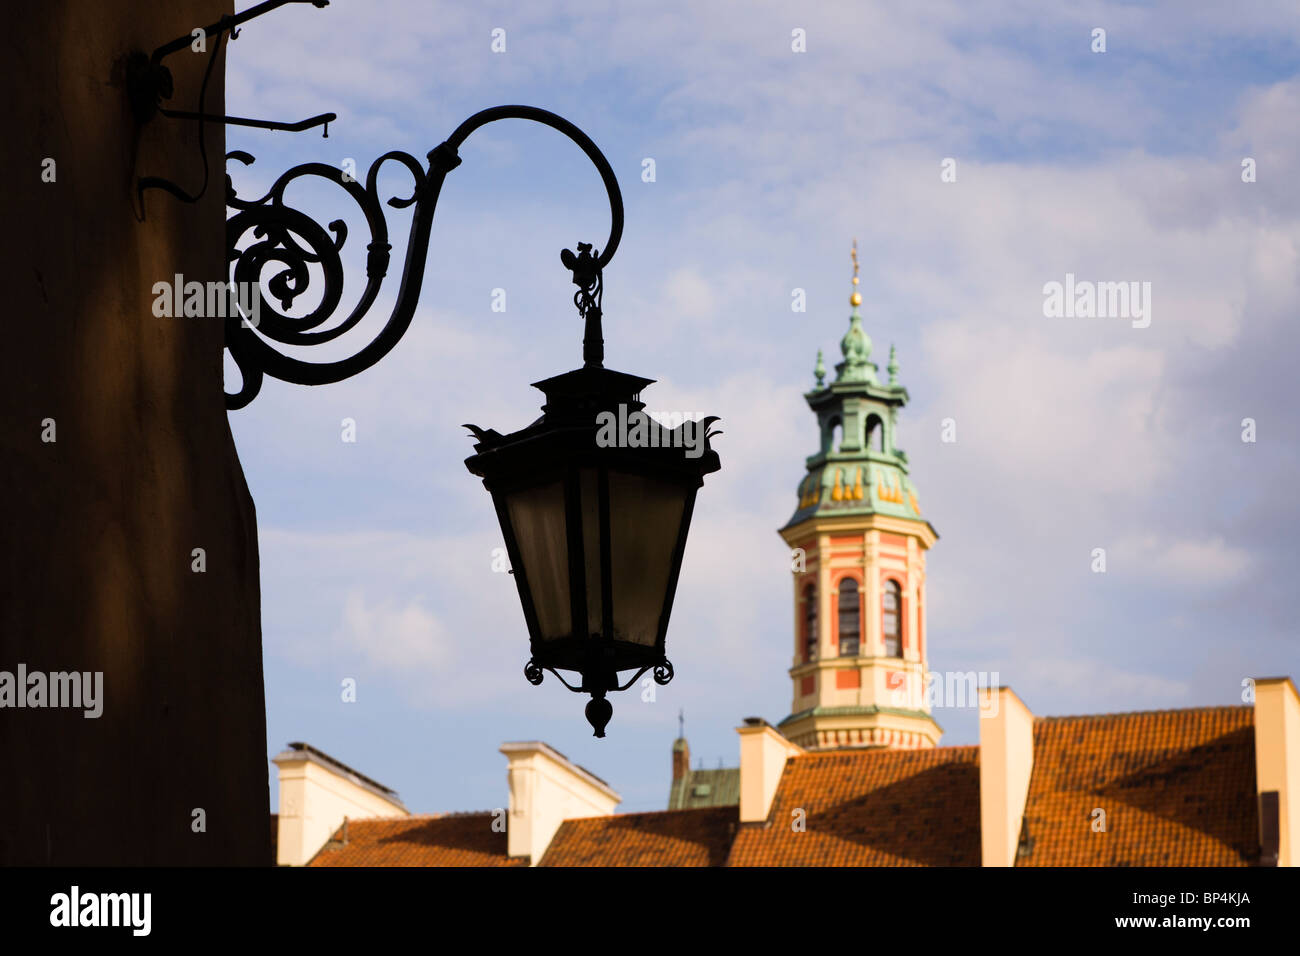 Old Town Market Place, Warsaw Poland. Stock Photo